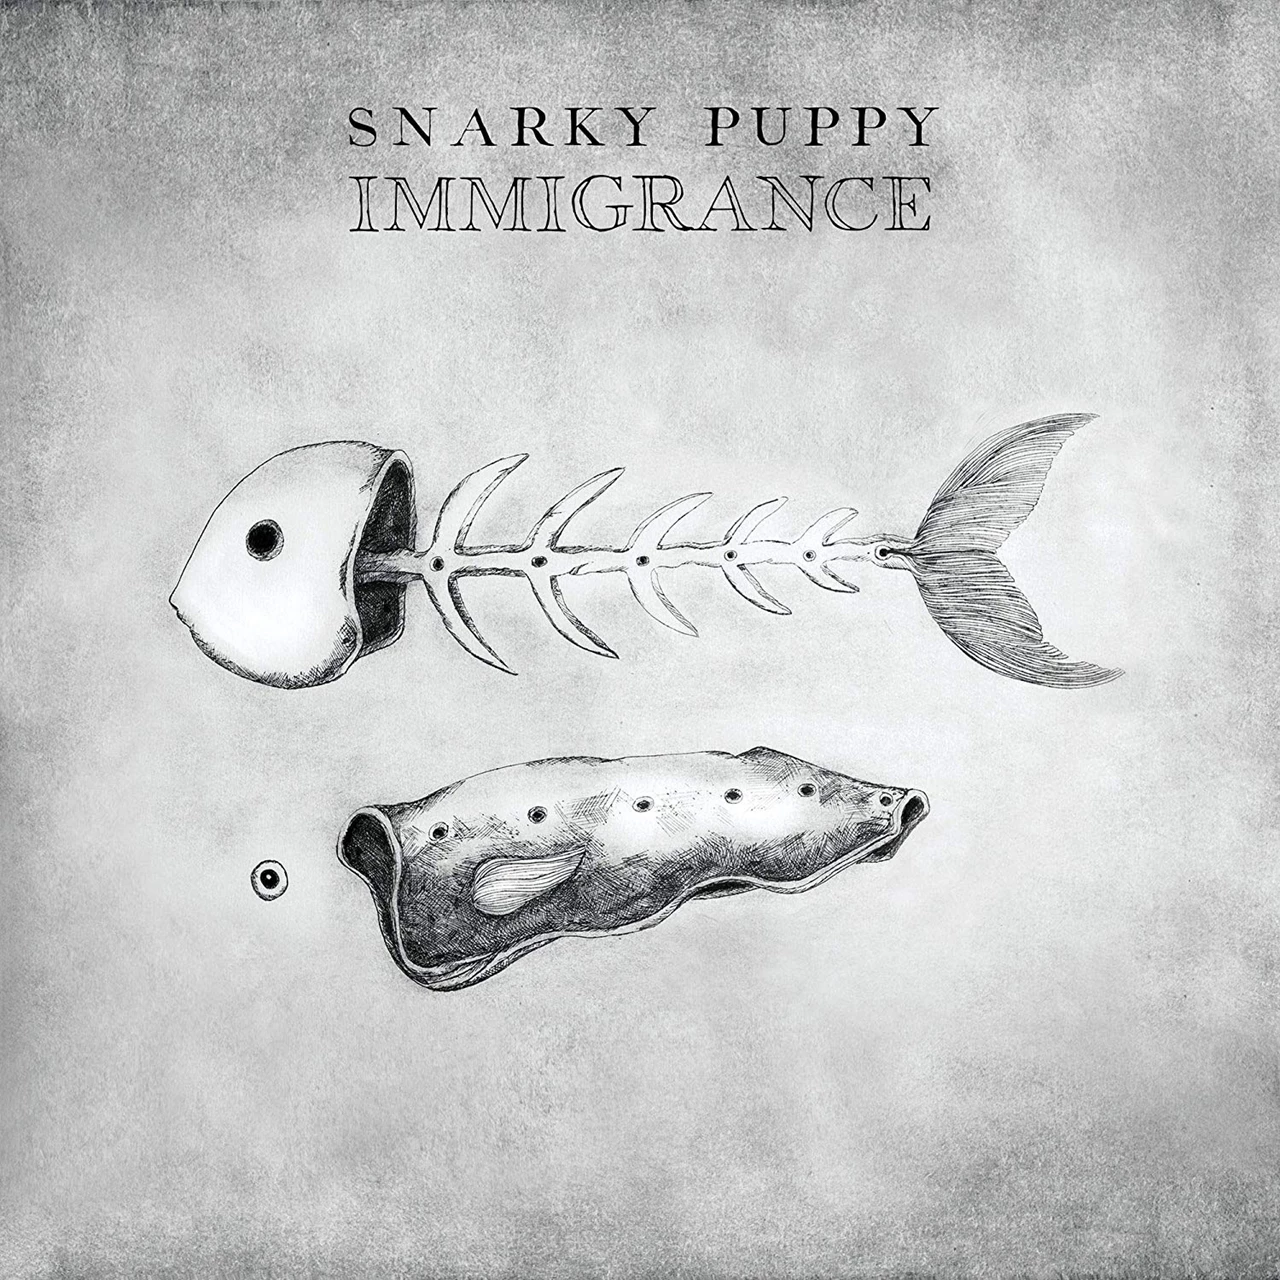 Immigrance by Snarky Puppy